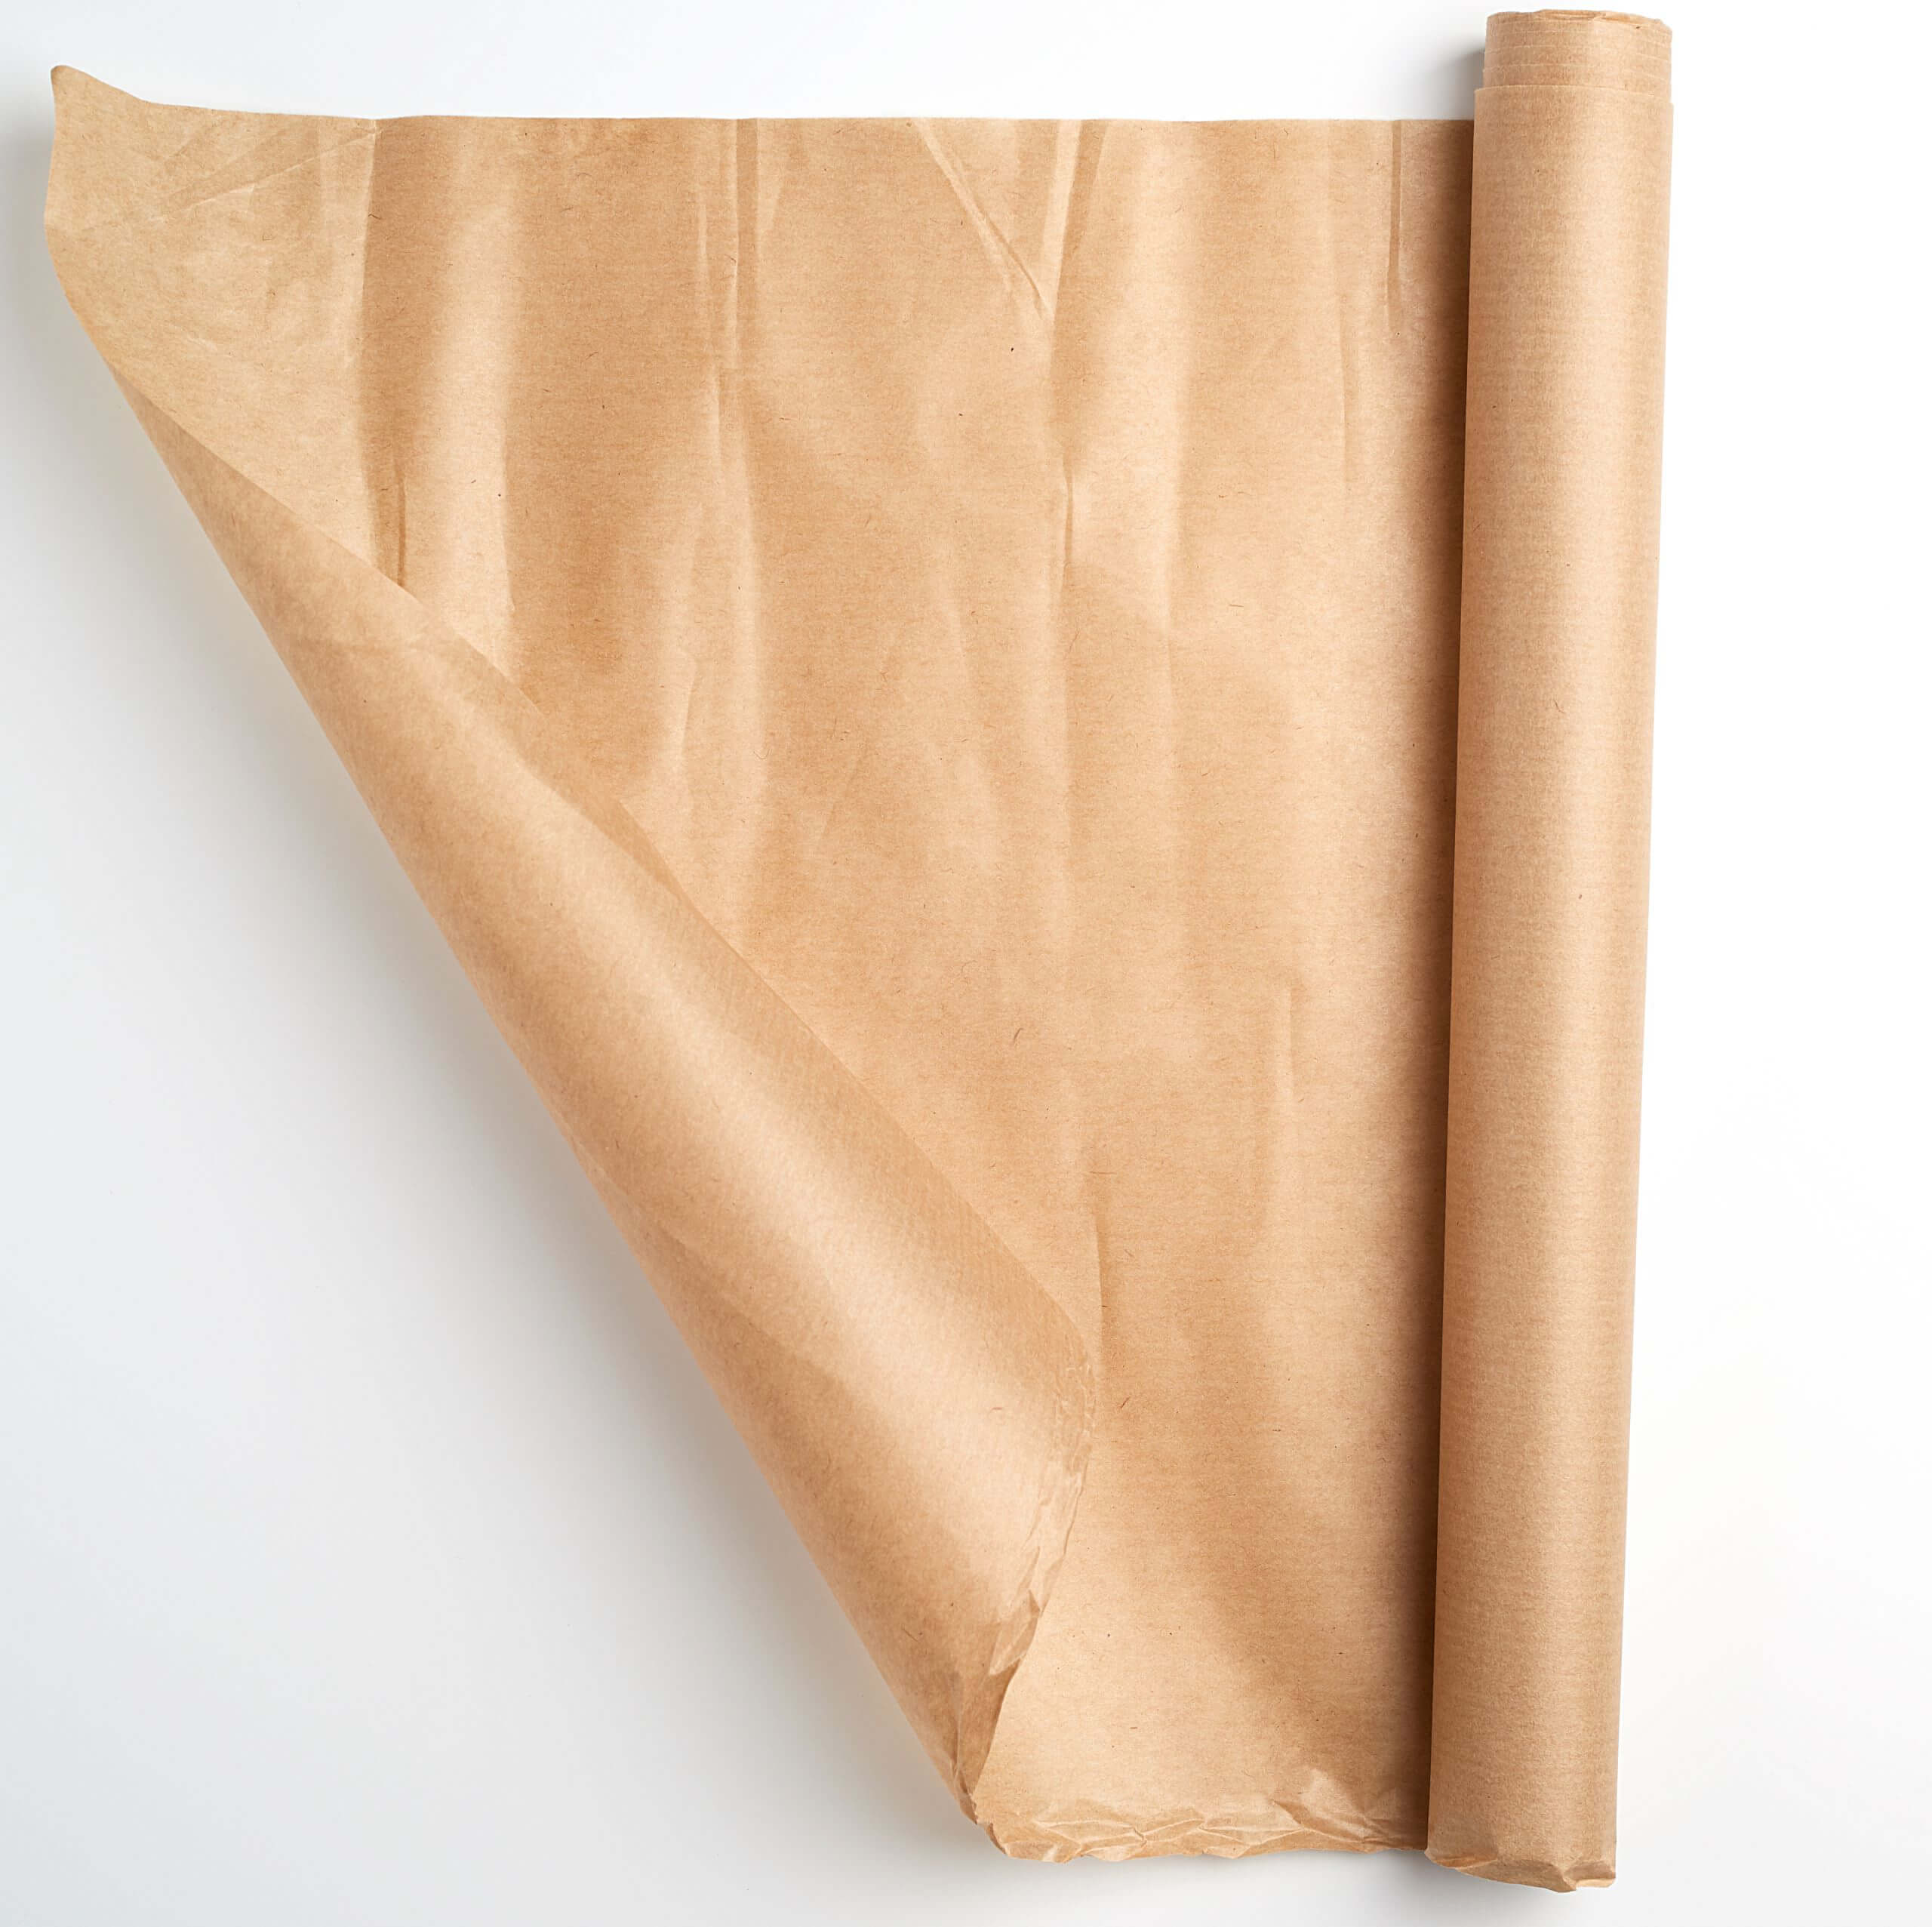 An image of Greaseproof Paper Packaging.